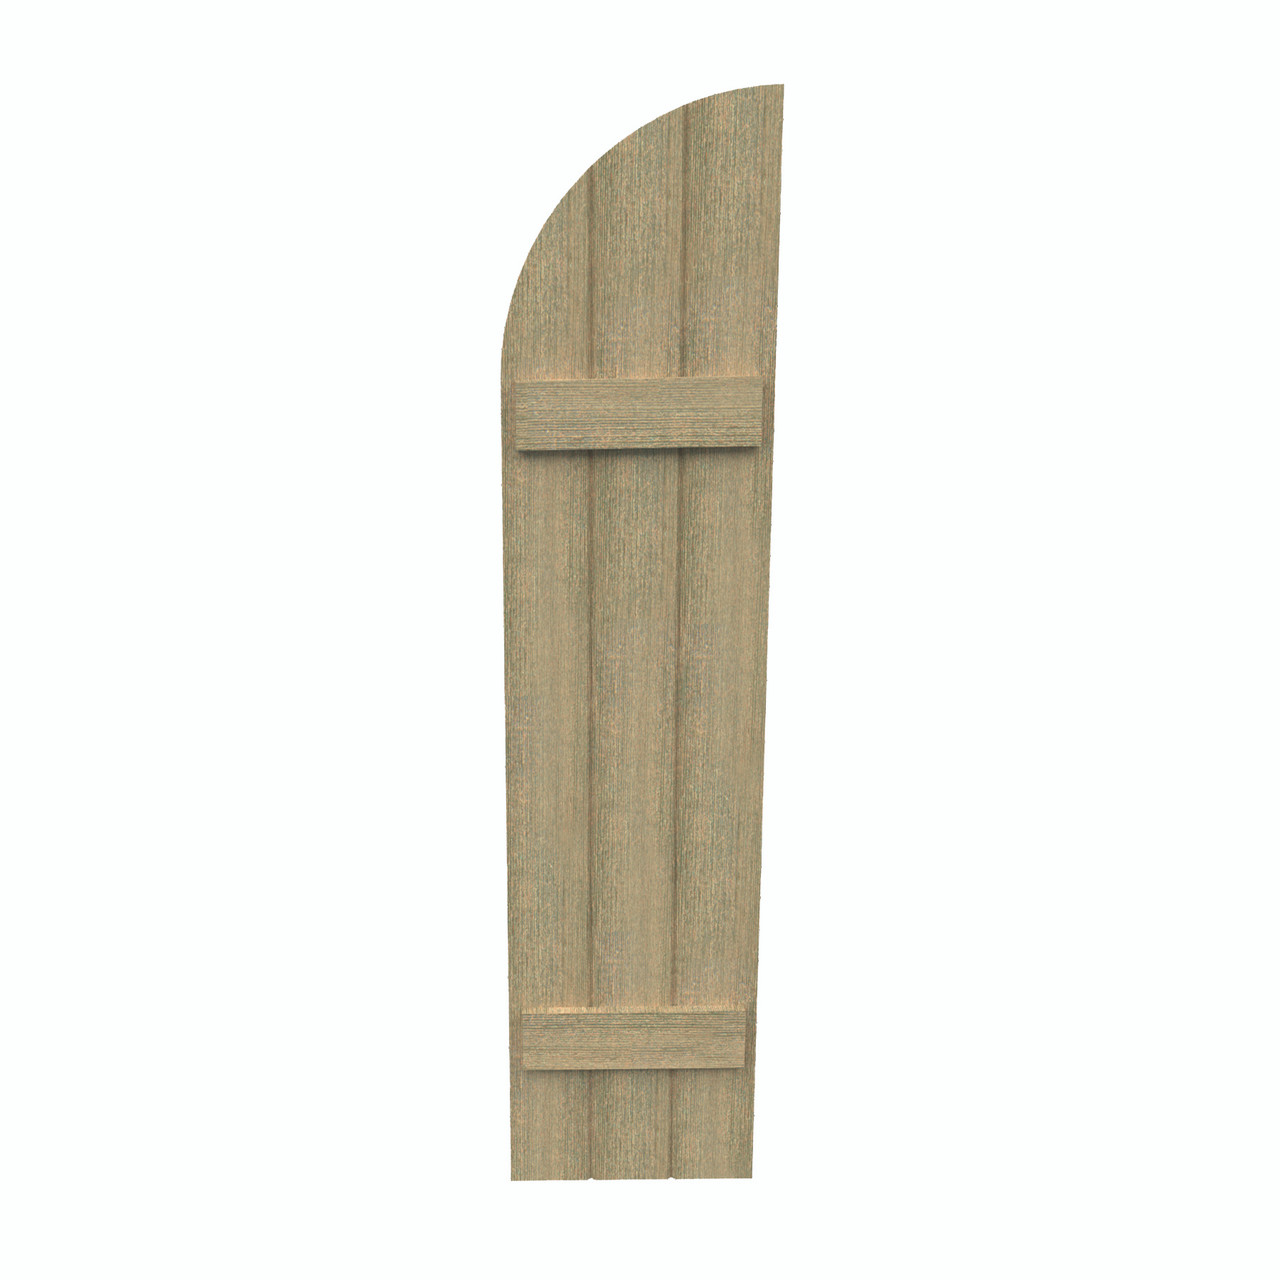 14 inch by 63 inch Quarter Round Shutter with 3-Boards